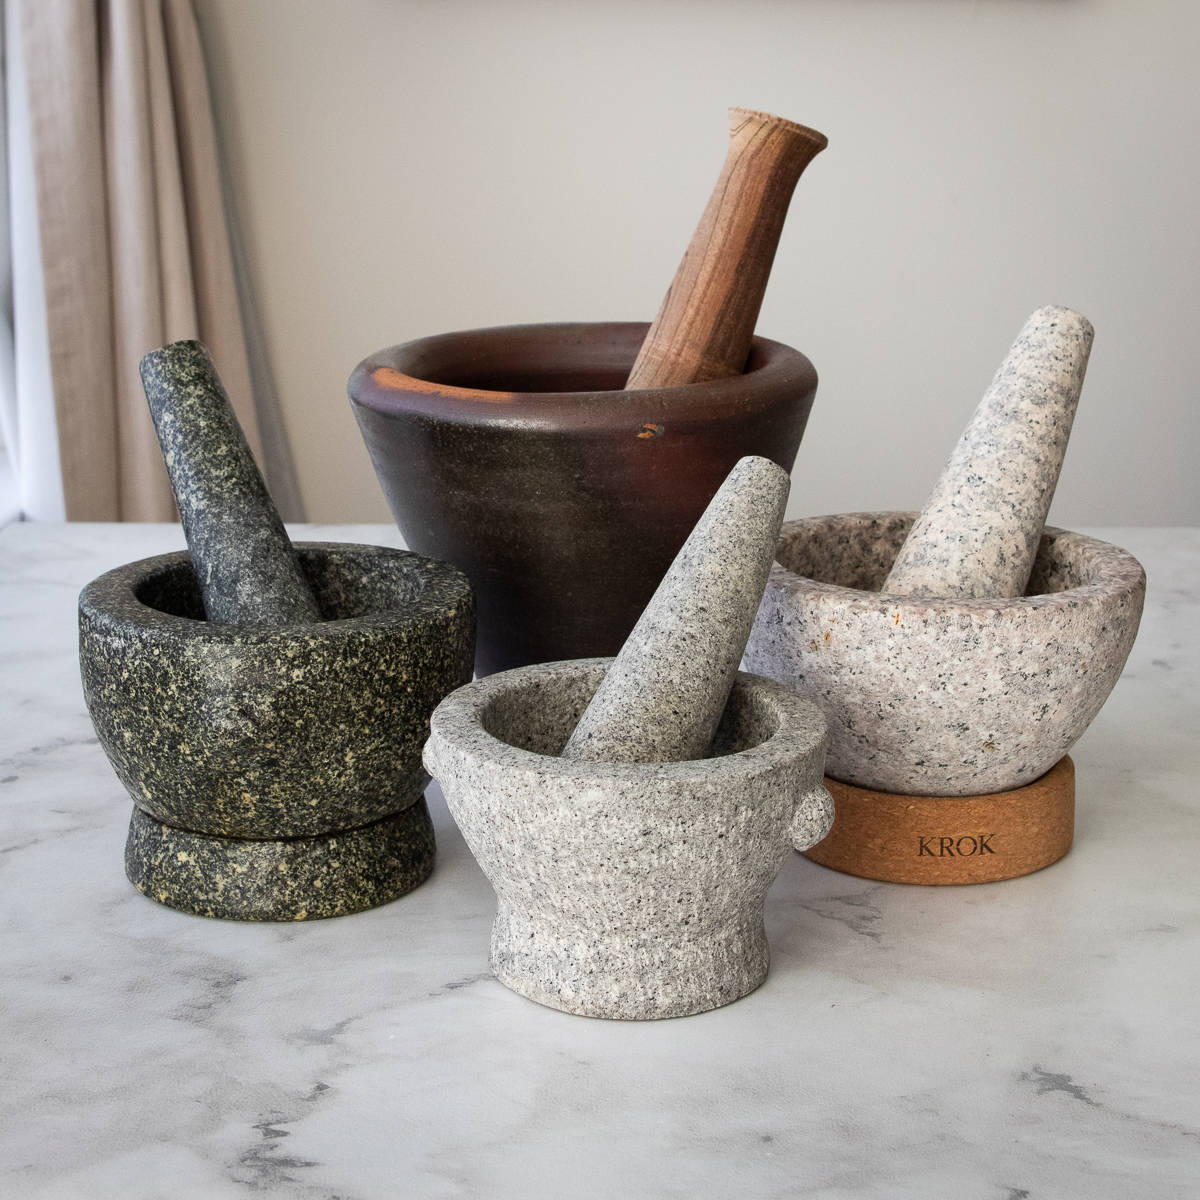 How to Use a Mortar and Pestle